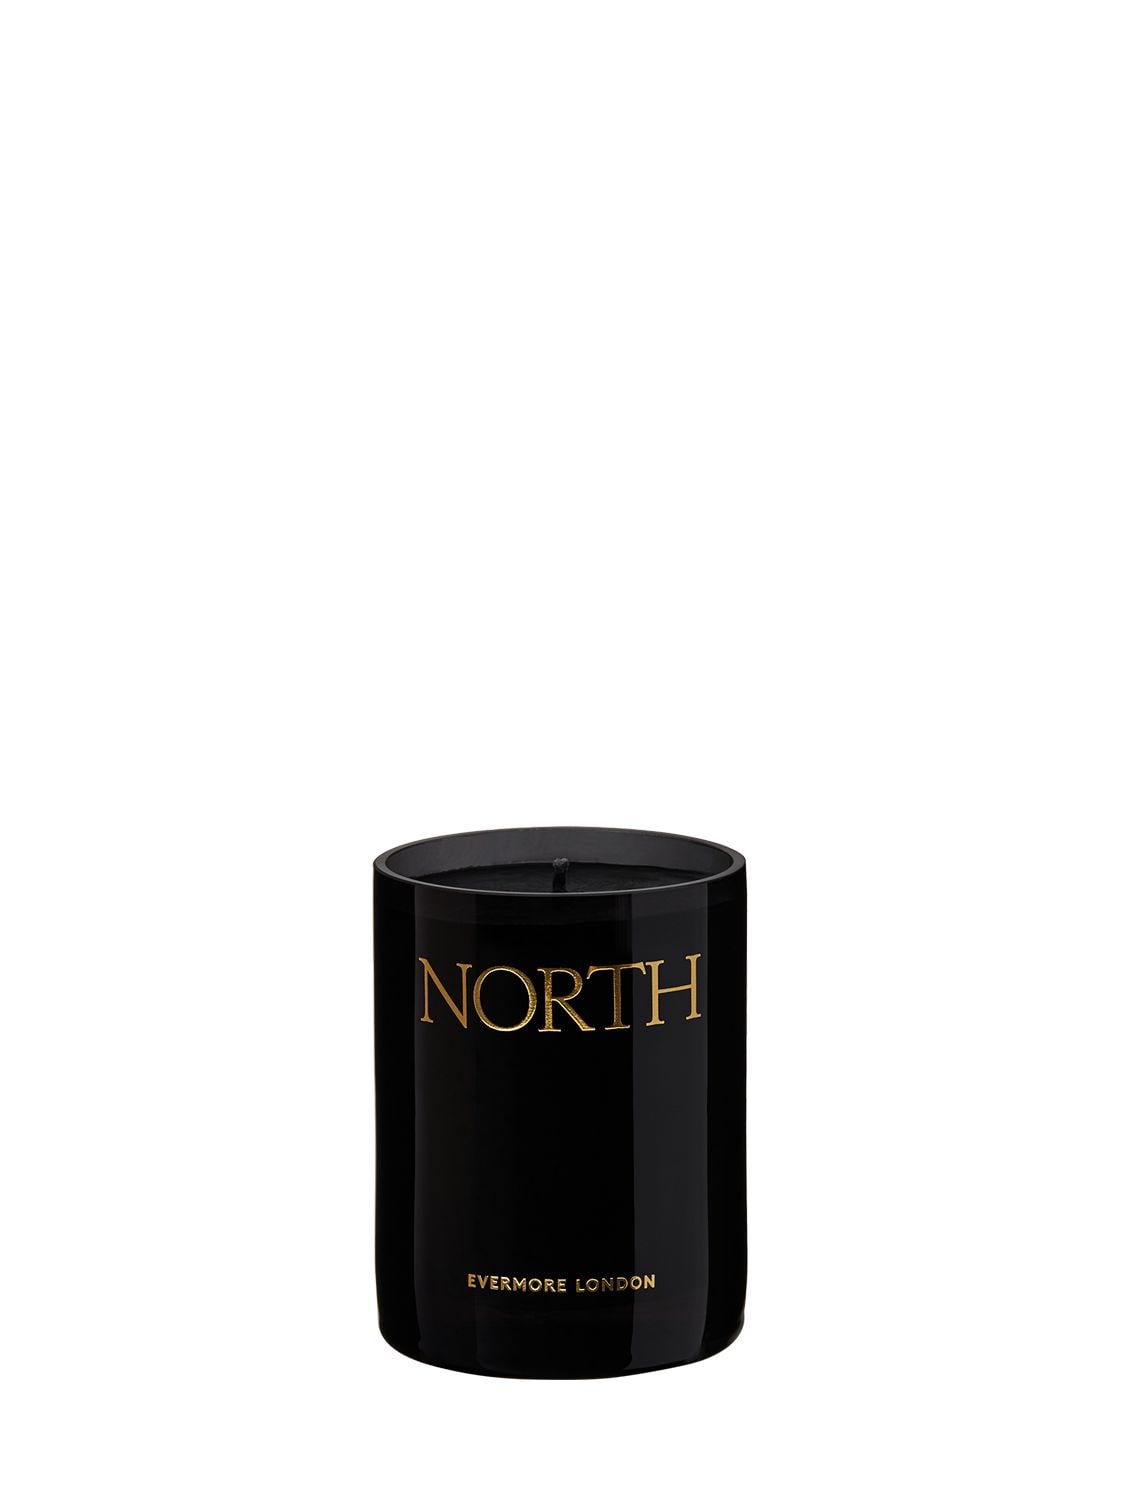 Evermore 300g North Scented Candle In Black